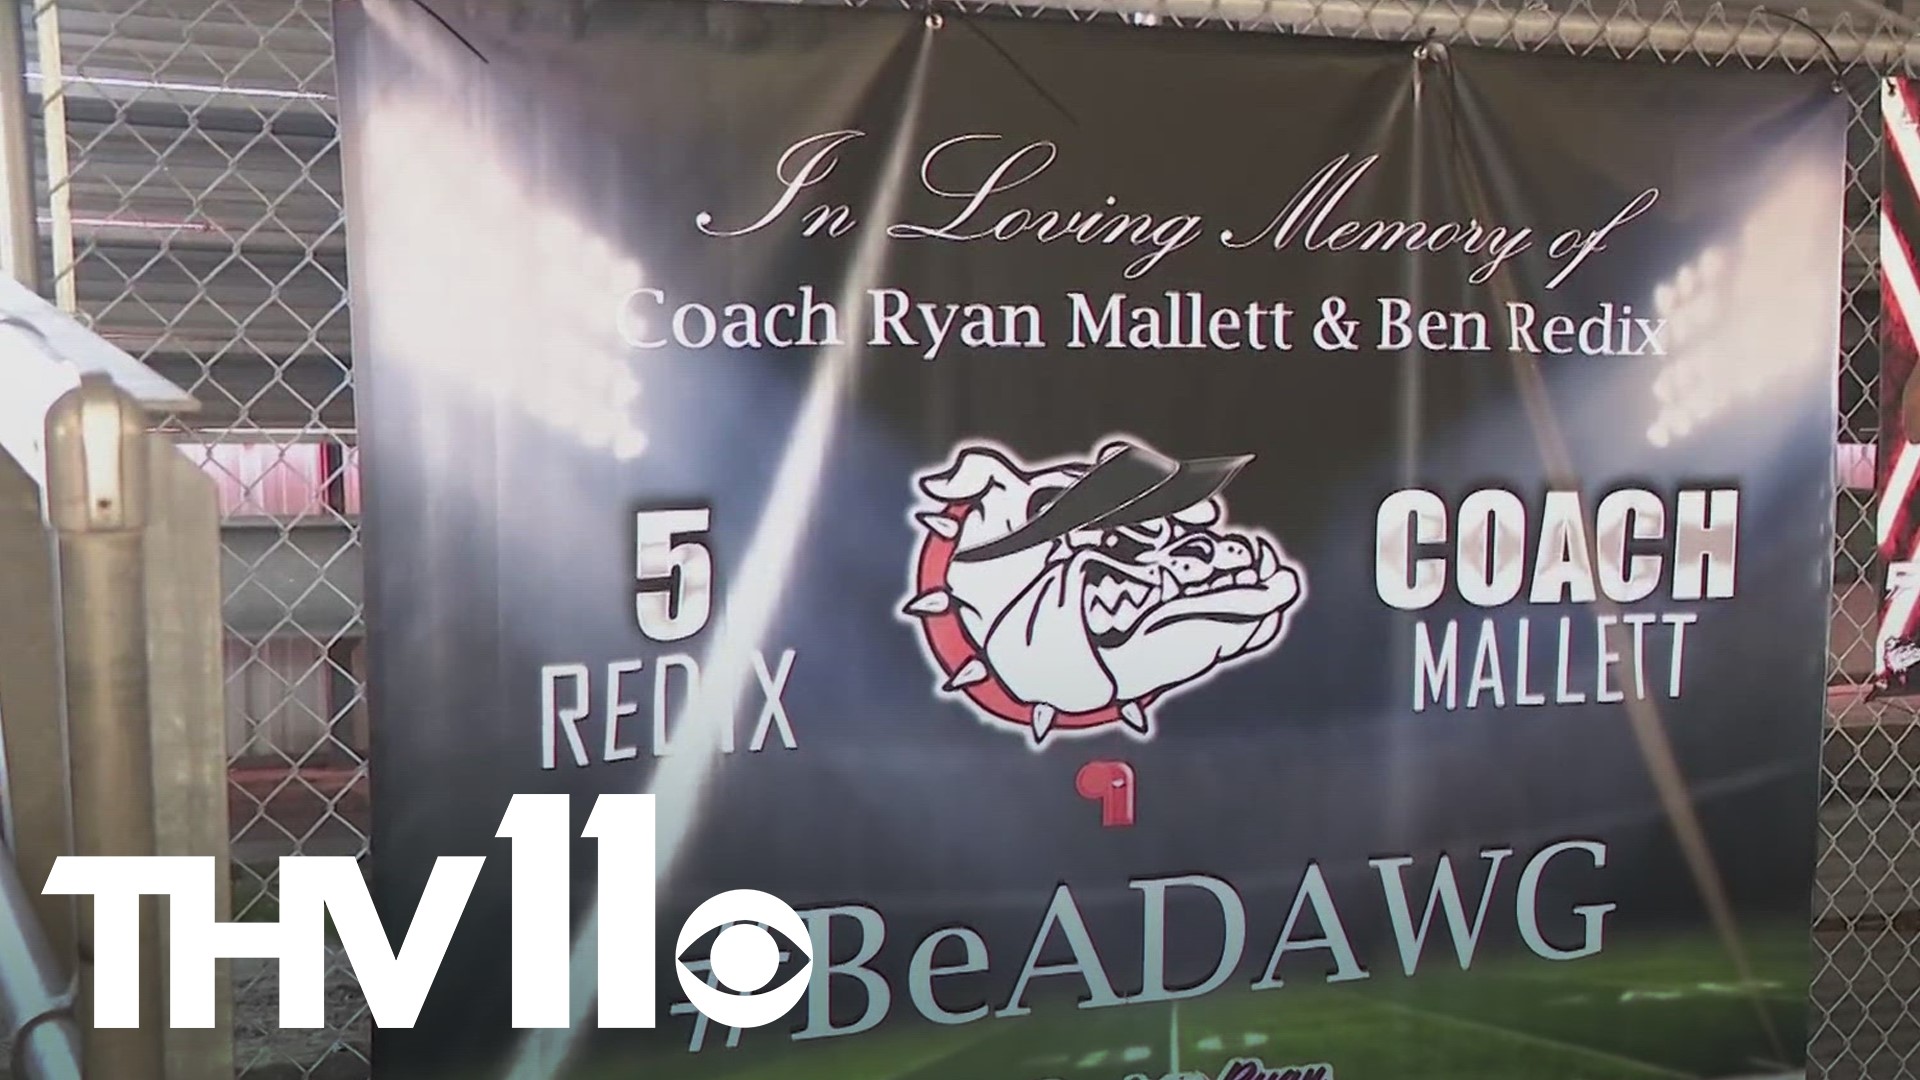 After a season of loss, the White Hall Bulldogs honored Coach Ryan Mallett and teammate Ben Redix on the first night of football kickoff.